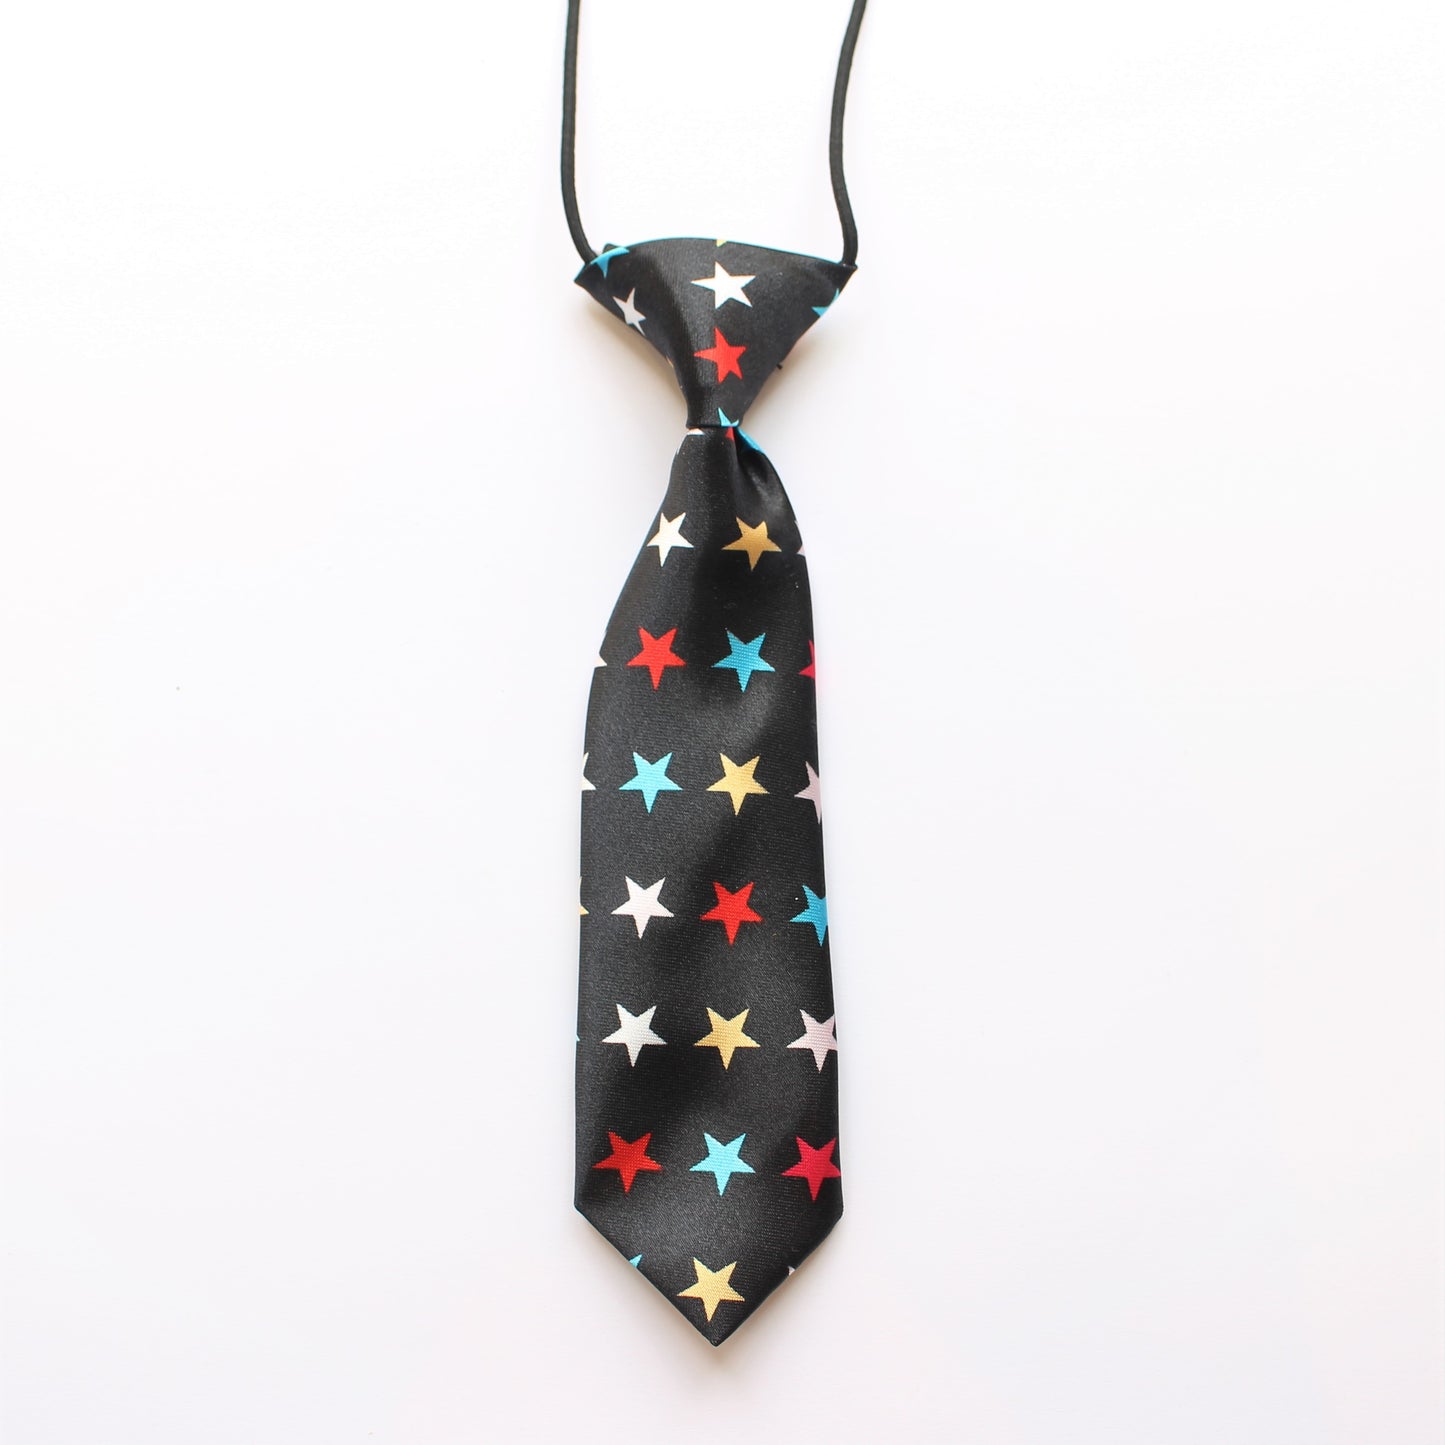 Patterned Baby Ties